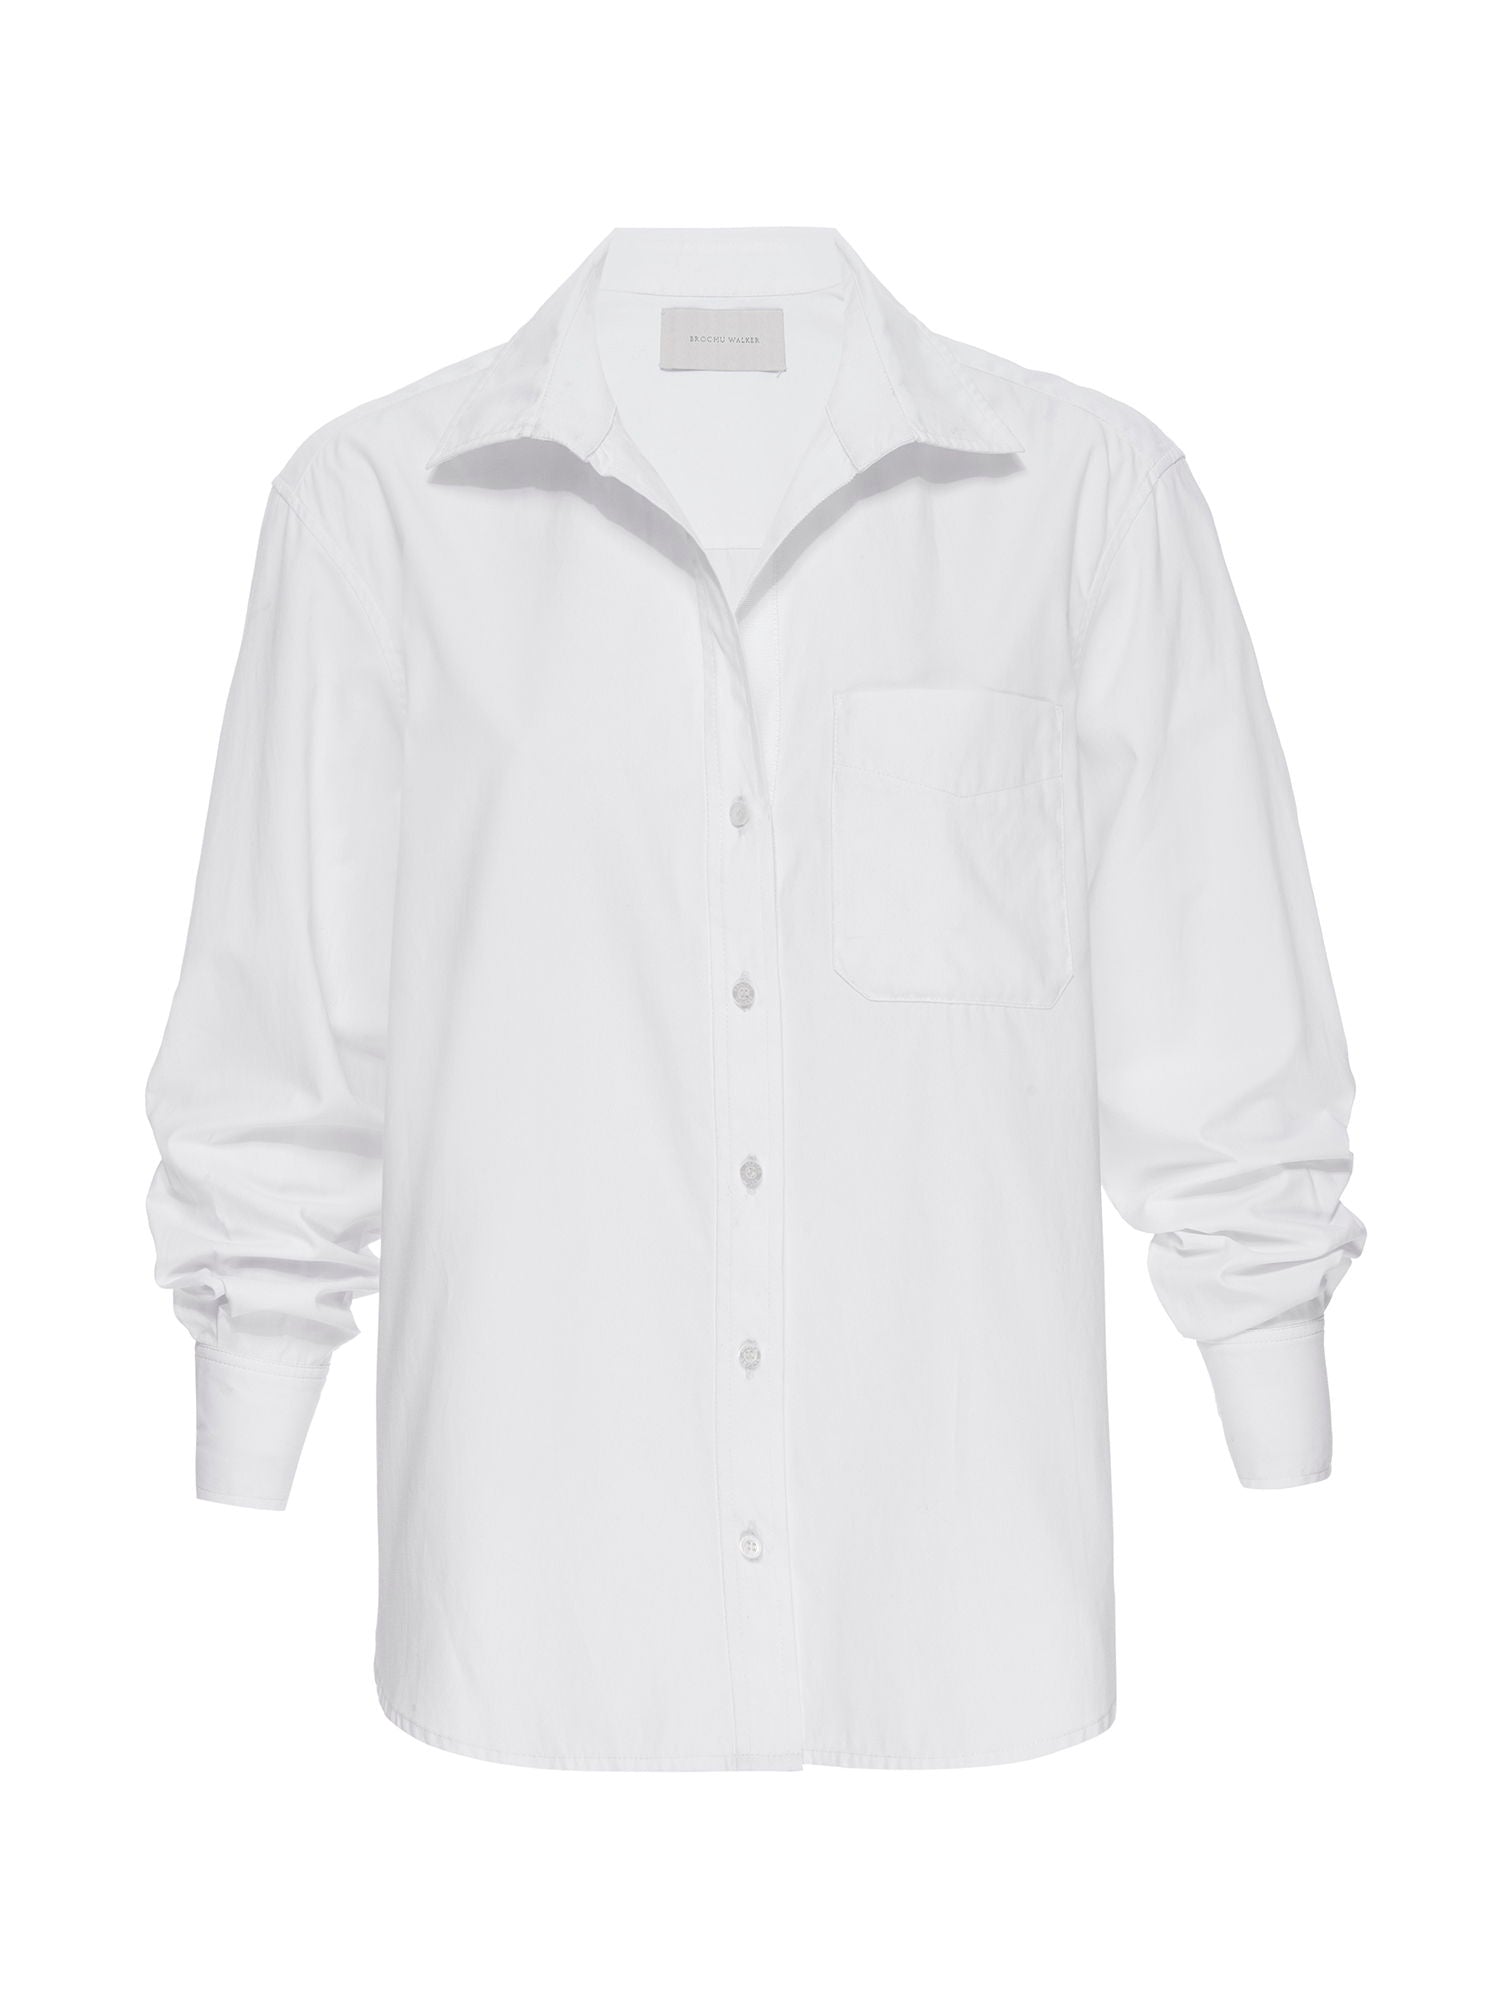 Everyday button up white shirt flat view